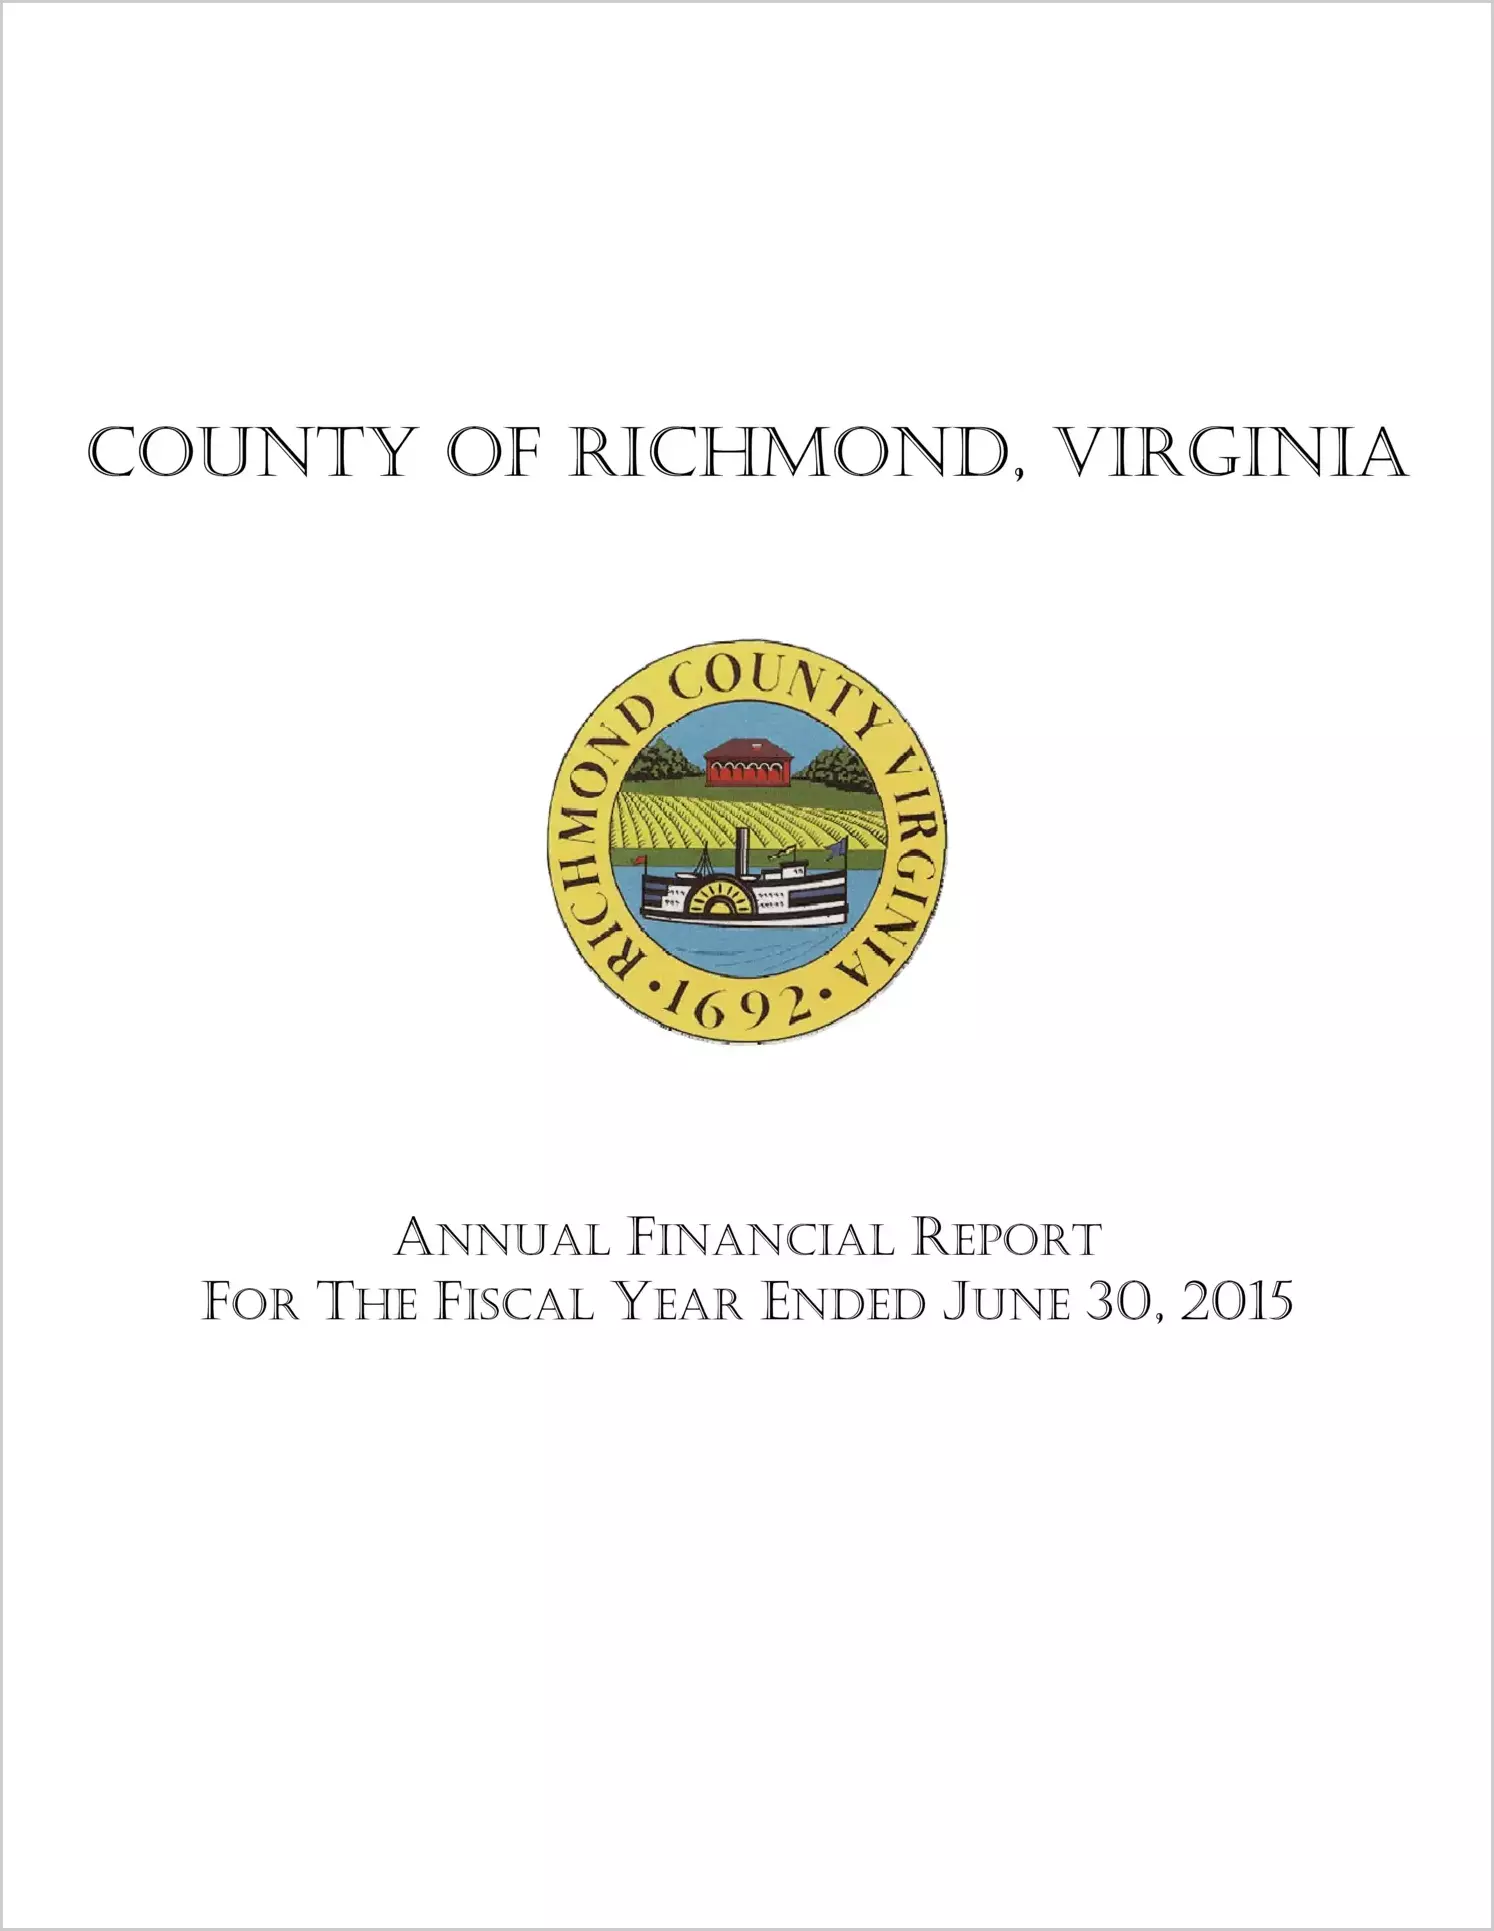 2015 Annual Financial Report for County of Richmond